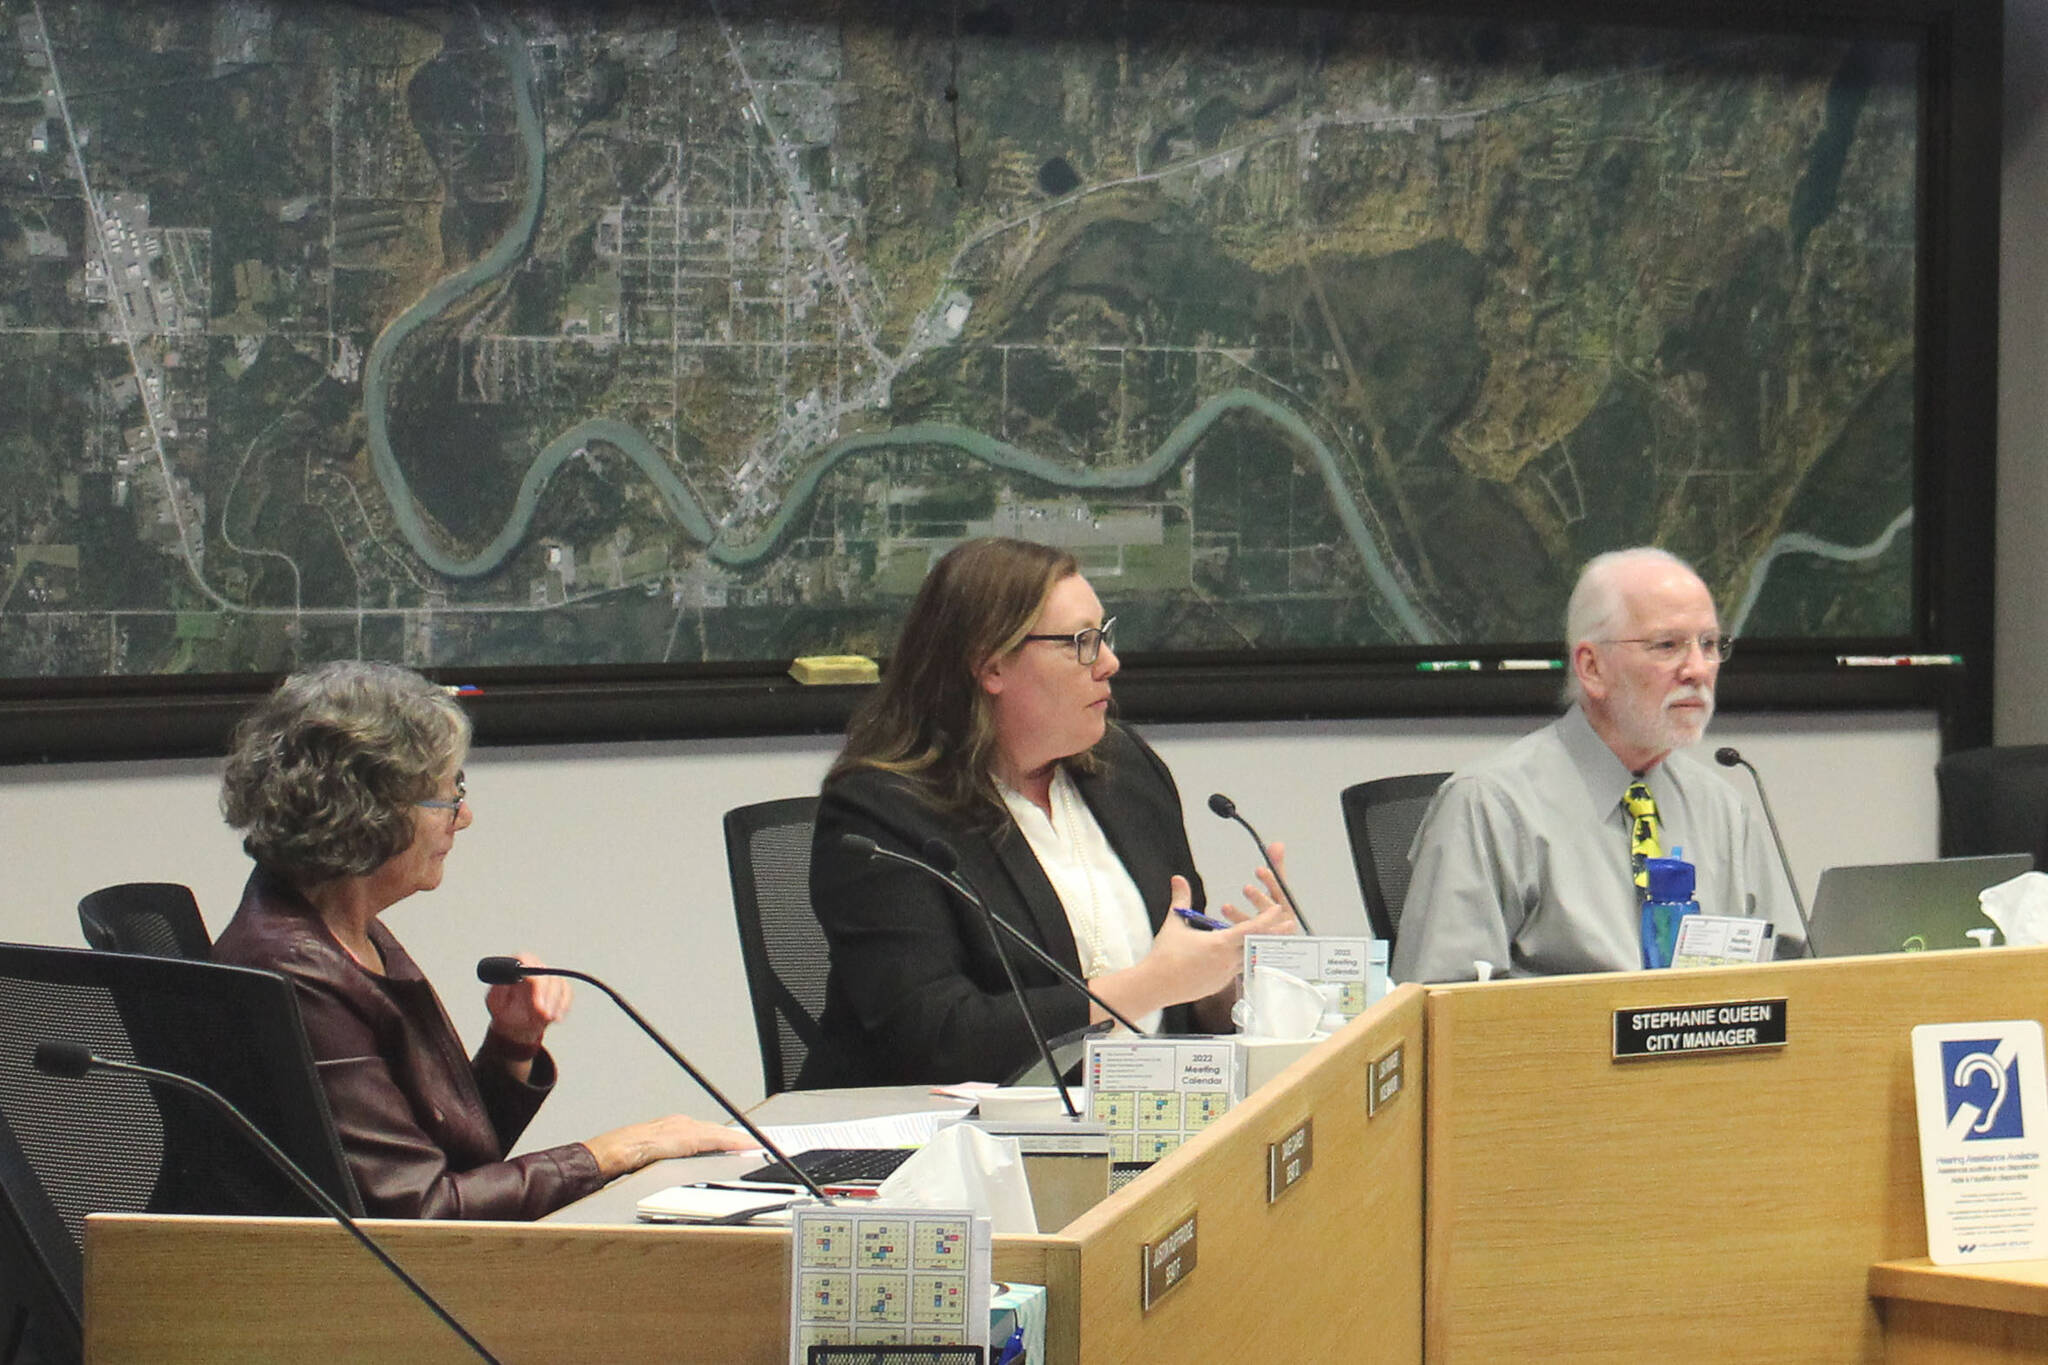 Soldotna City Manager Stephanie Queen (center) speaks during a meeting of the Soldotna City Council on Wednesday, April 13, 2022, in Soldotna, Alaska. (Ashlyn O’Hara/Peninsula Clarion)